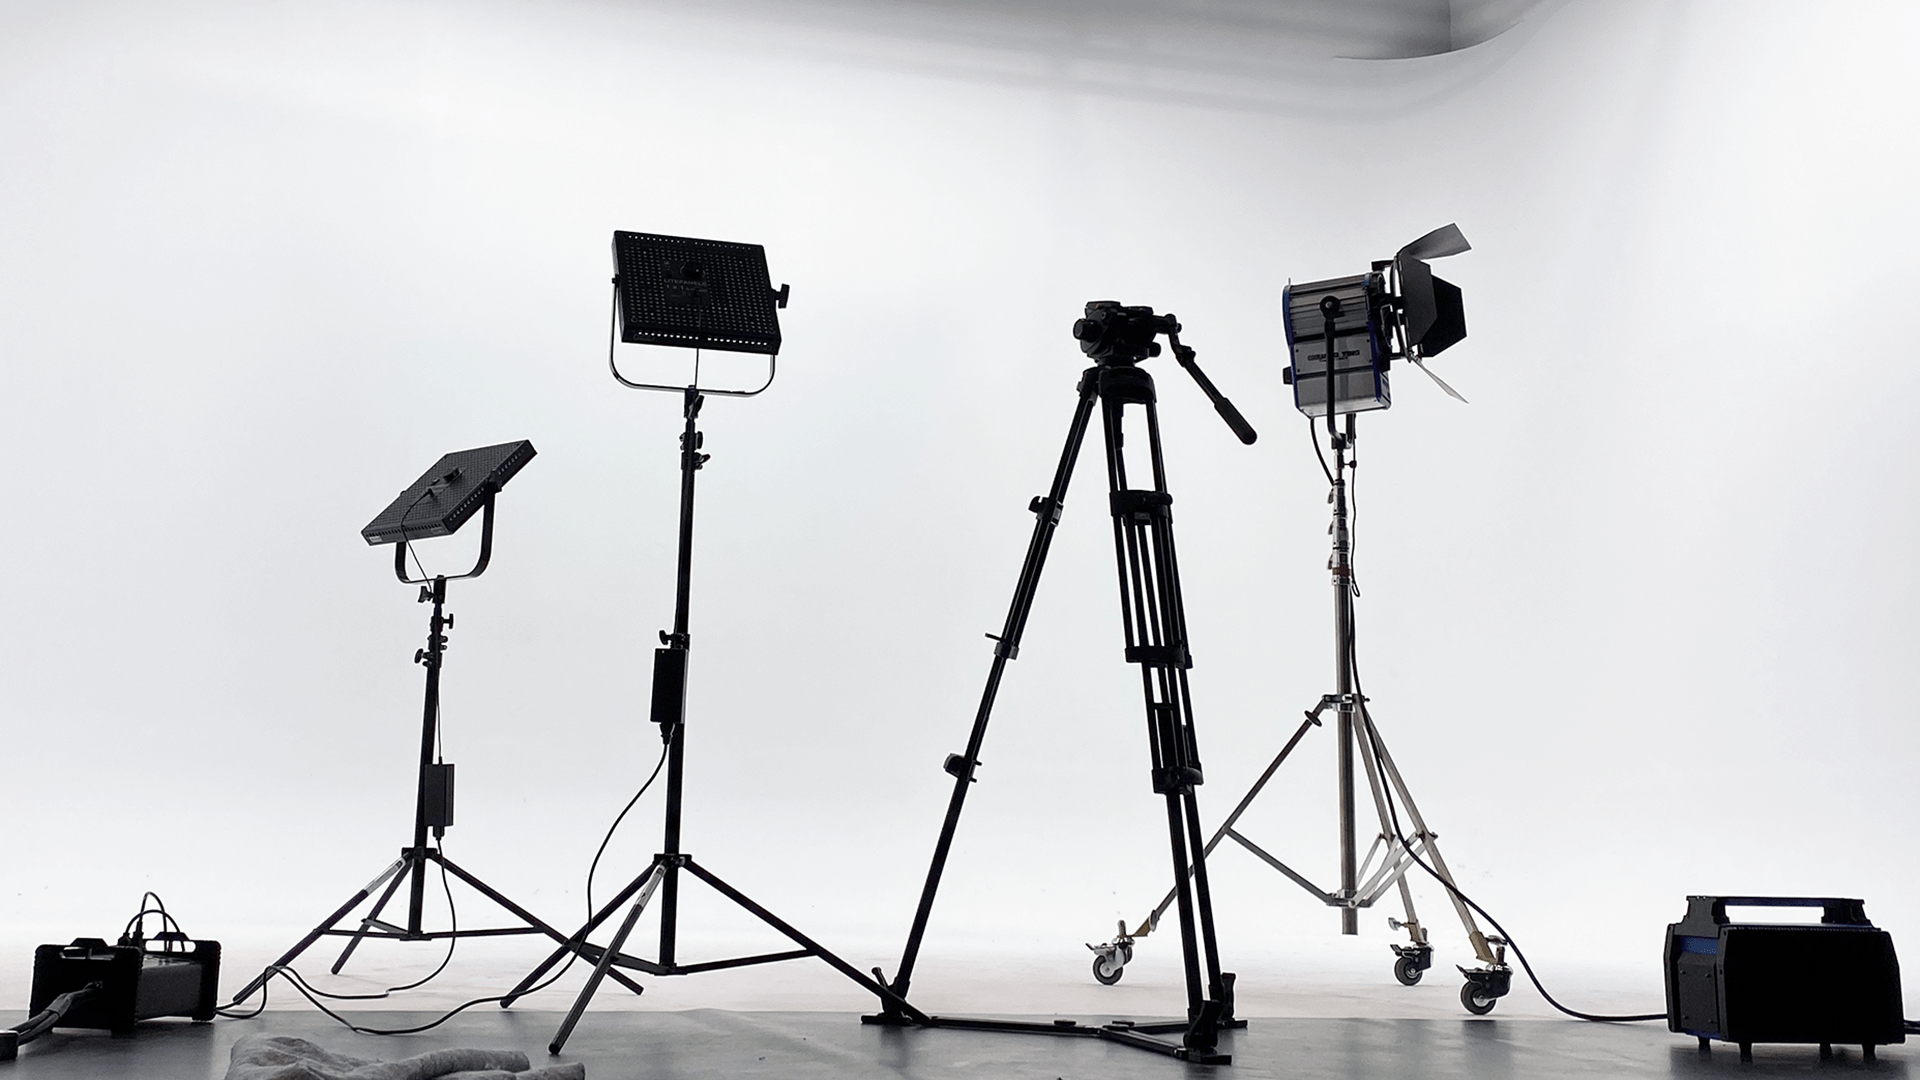 Small shoot setup on they white cyclorama at The Film Hub